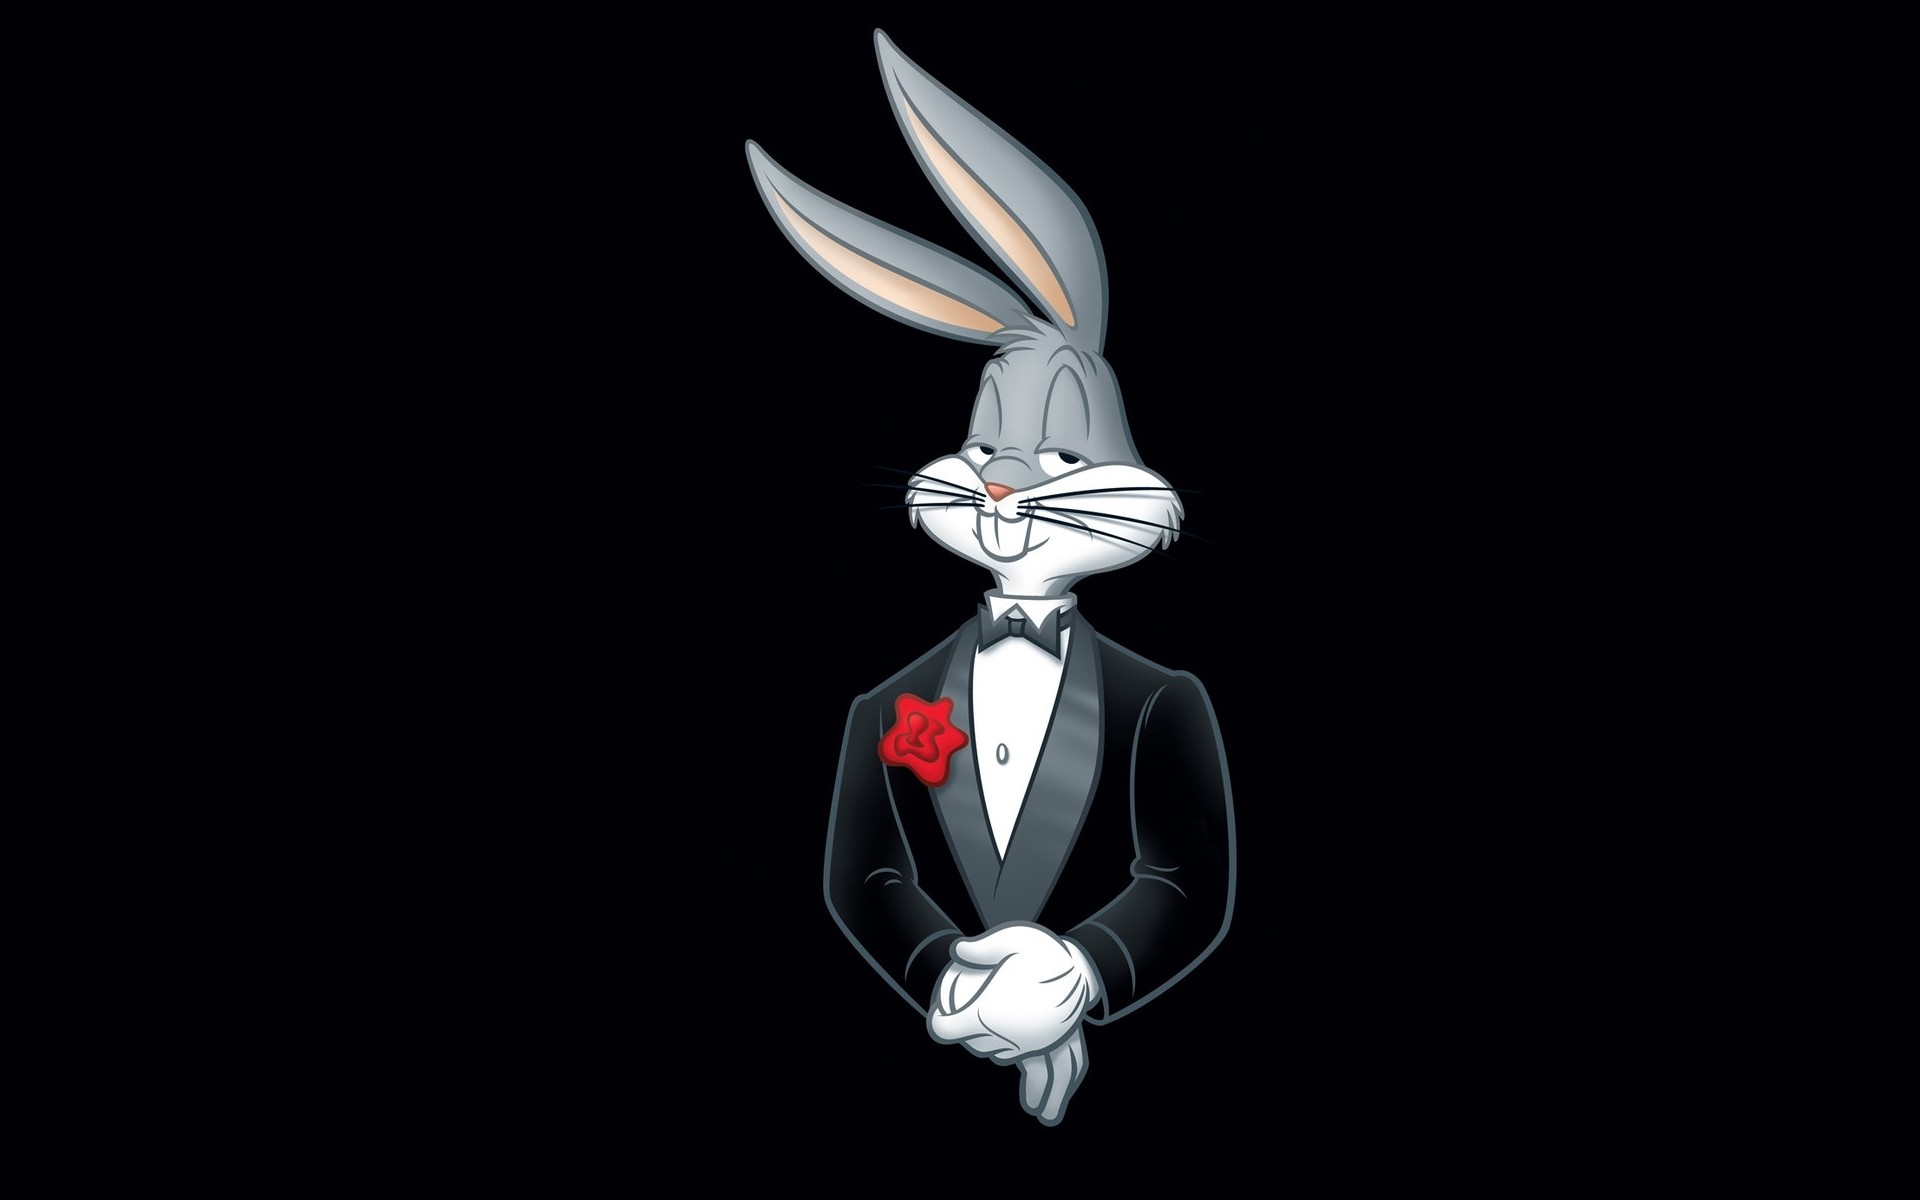 General 1920x1200 cartoon Bugs Bunny Warner Brothers suits rabbits Looney Tunes black background